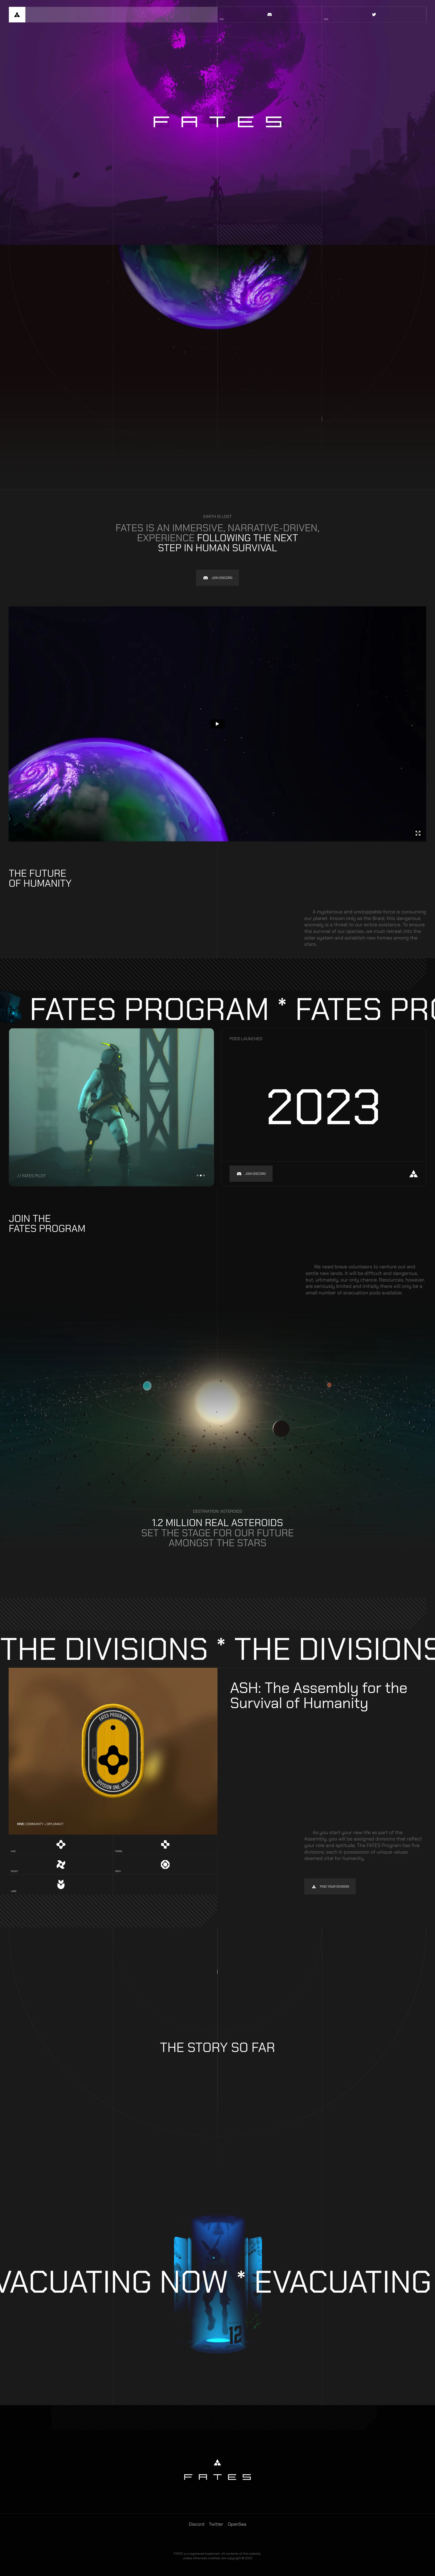 FATES Landing Page Example: FATES is an immersive, narrative-driven, web3 experience following the next step in human survival.